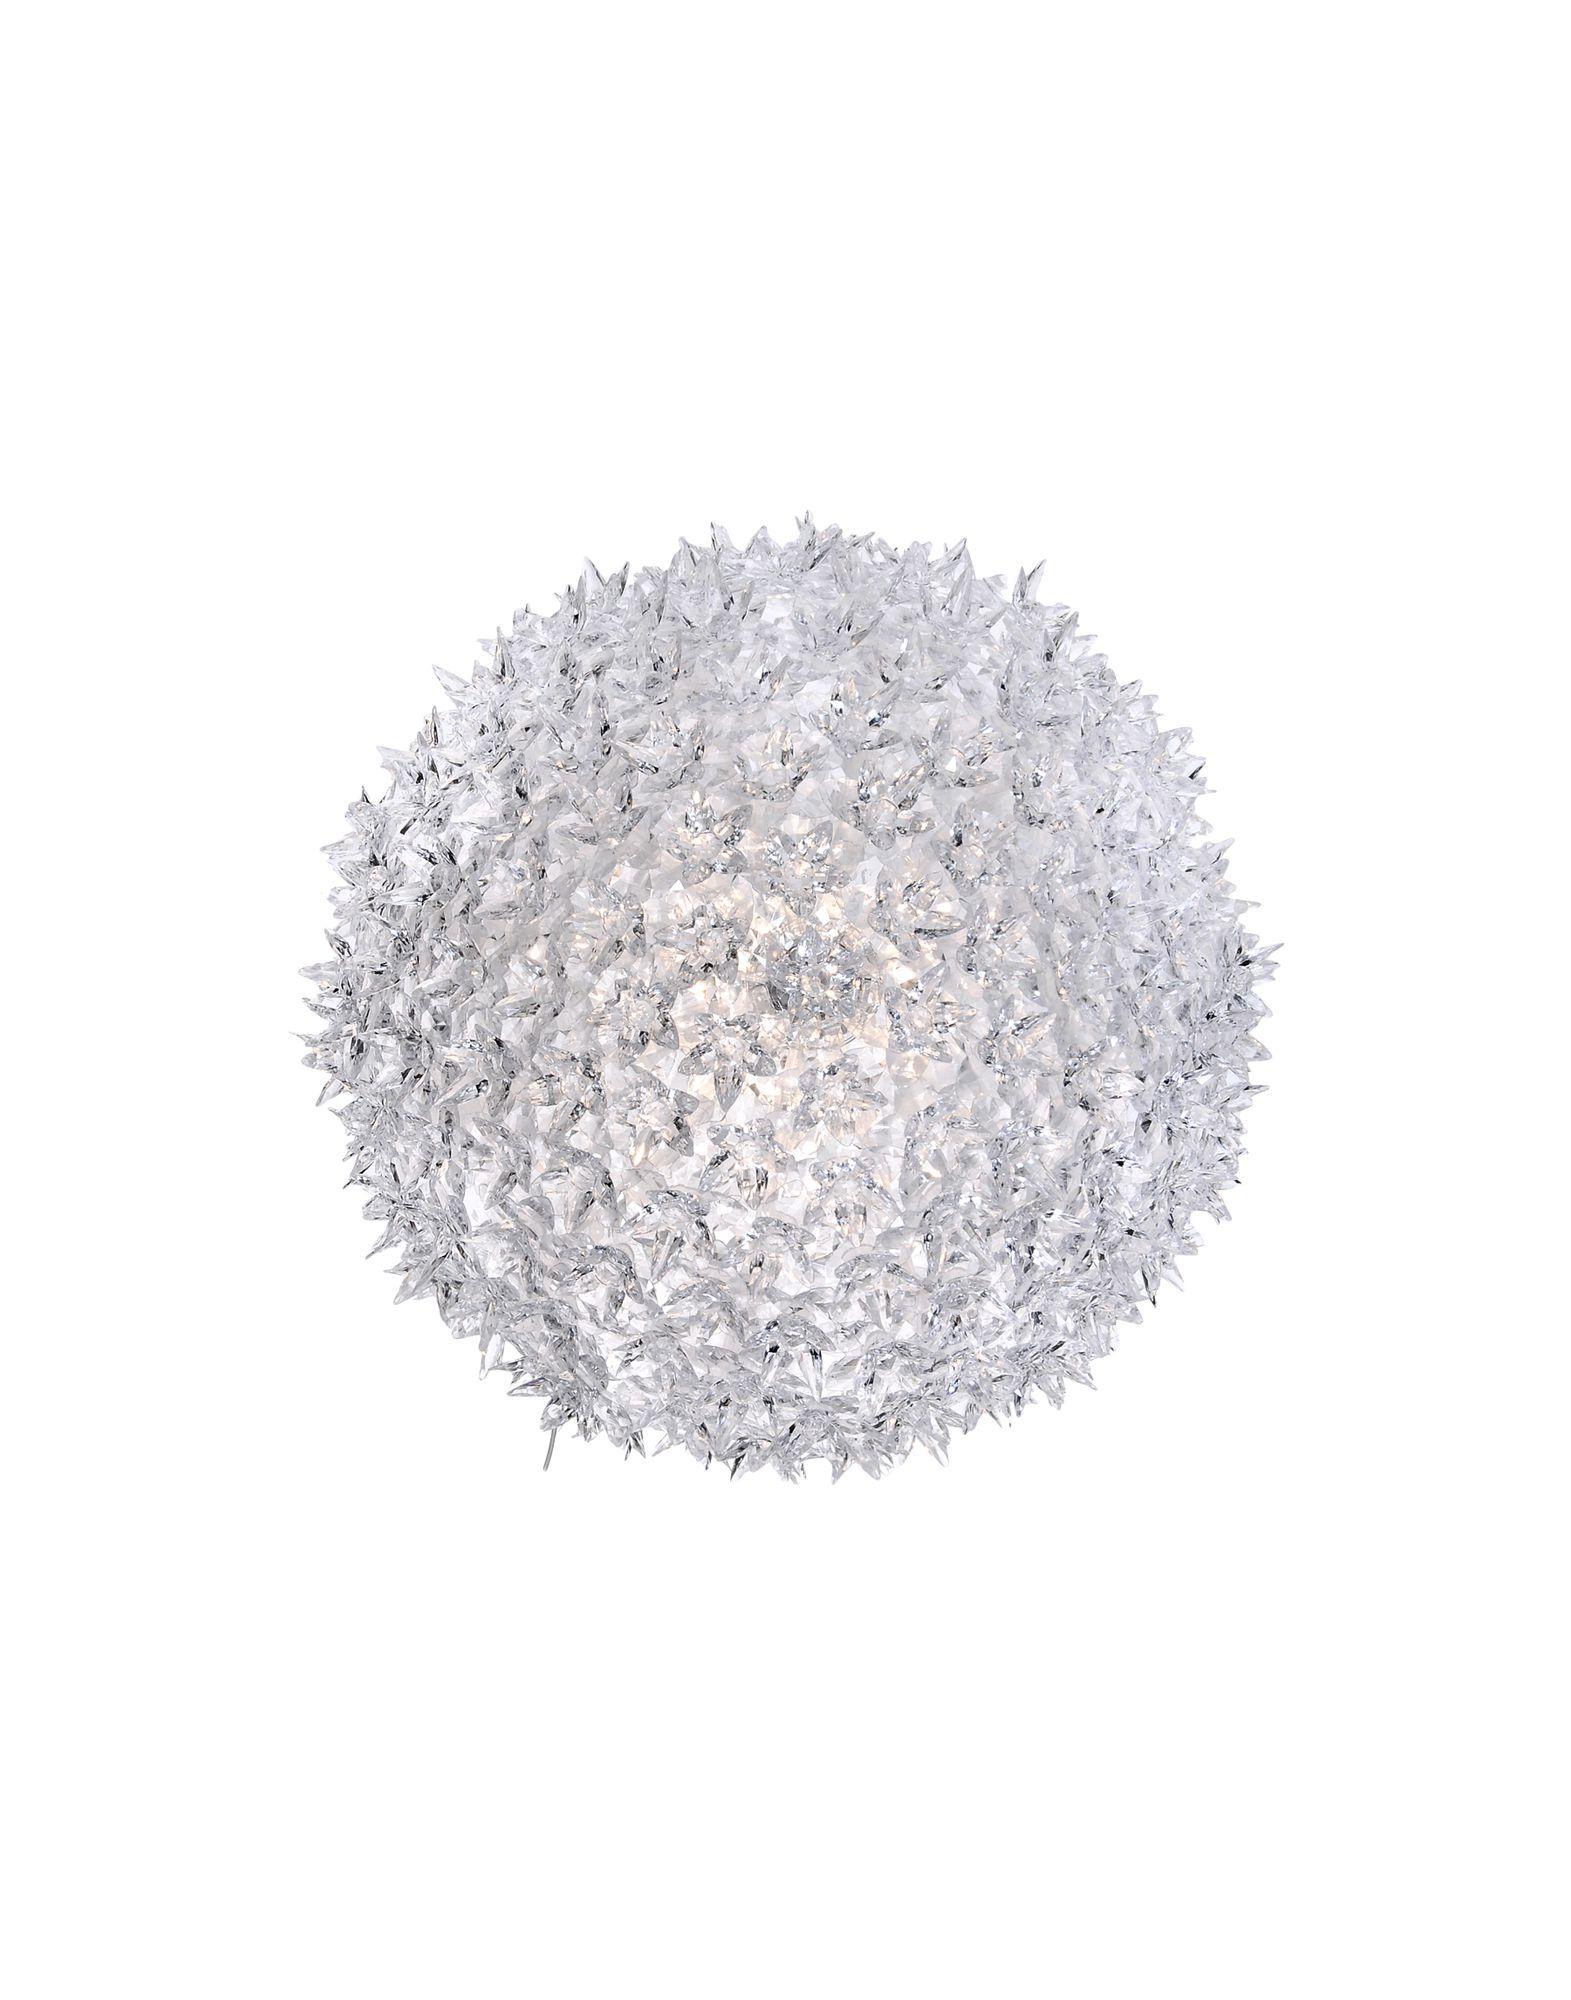 The Bloom New lamp family with its elliptical shape and distinctive original structure covered by sparkling polycarbonate flowers as pure and precious as crystal comes in, wall light. As delicate as a spring bouquet, Bloom lights offer new and